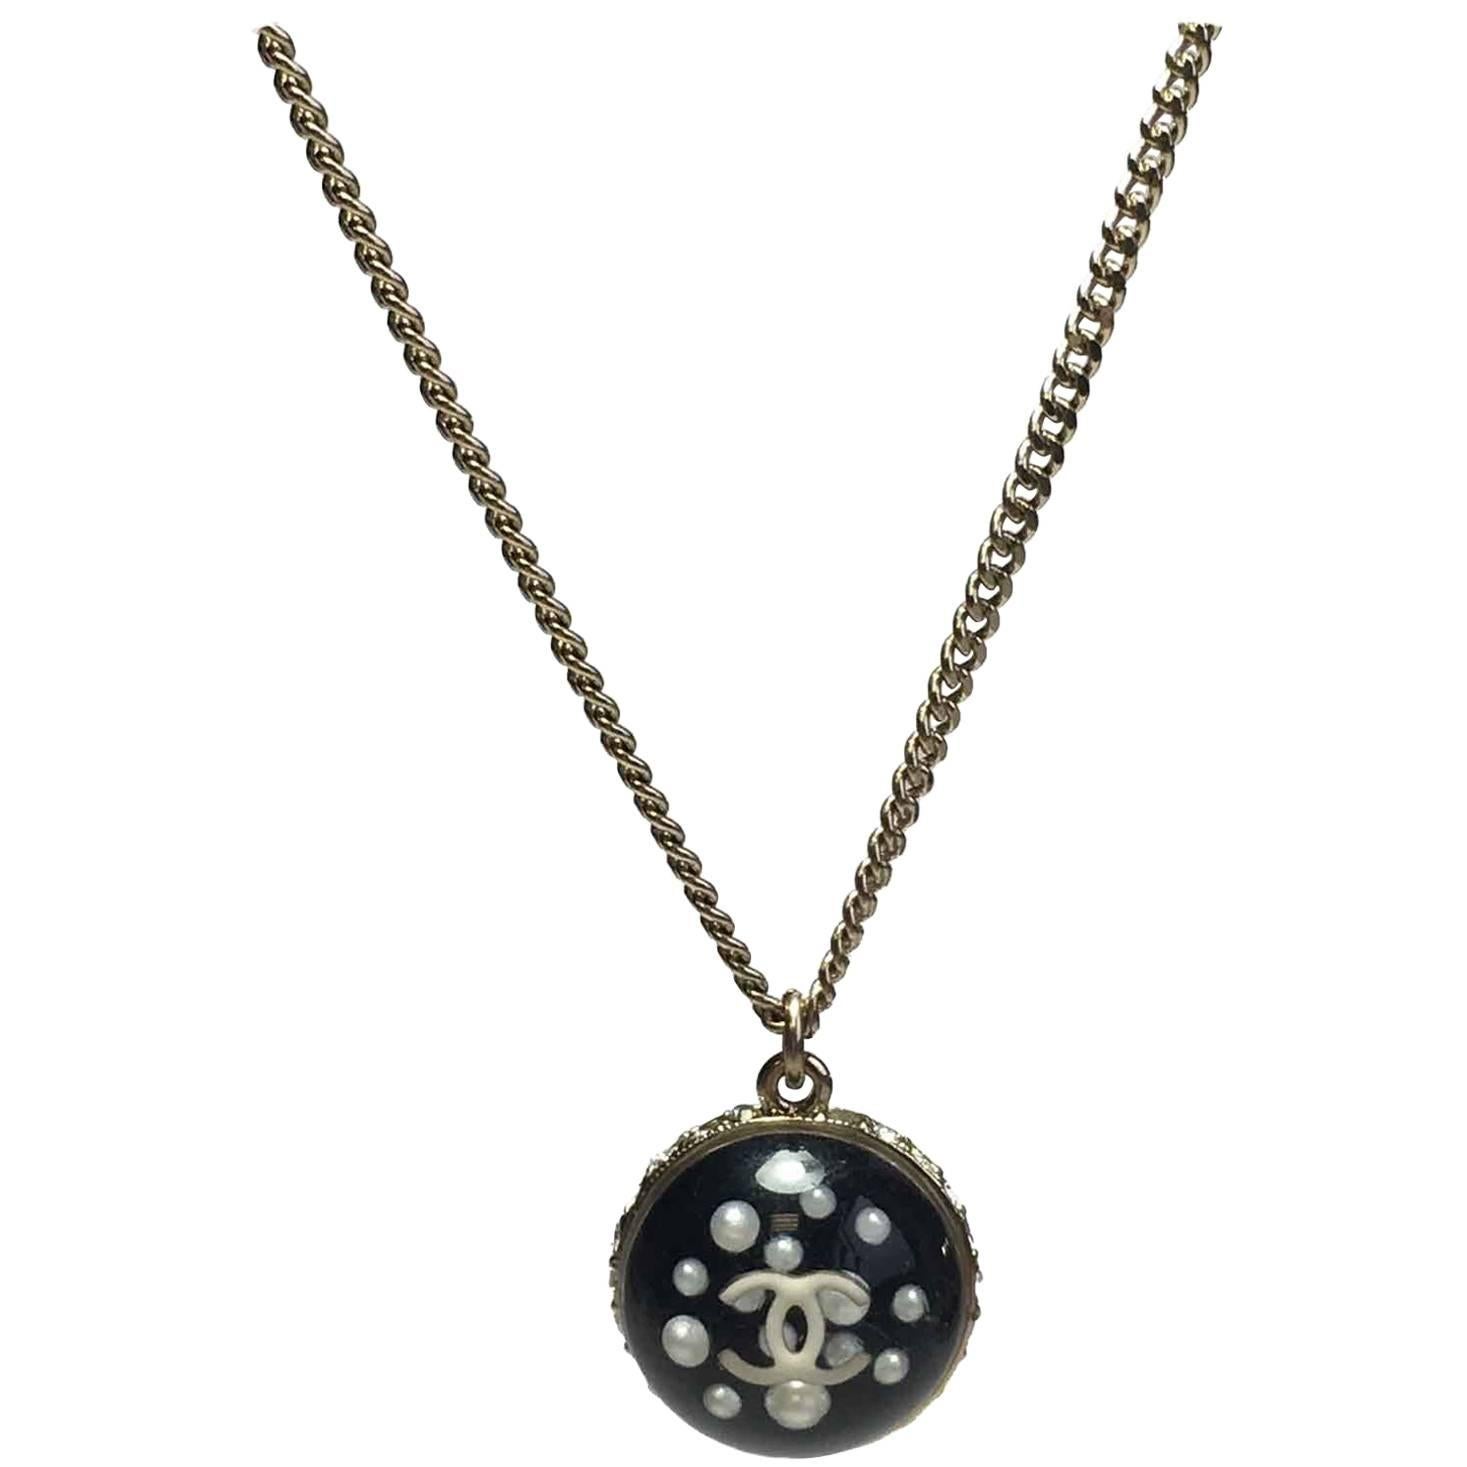 CHANEL Necklace in Gilded Metal and Ball Pendant with Inclusion of CC and Pearls